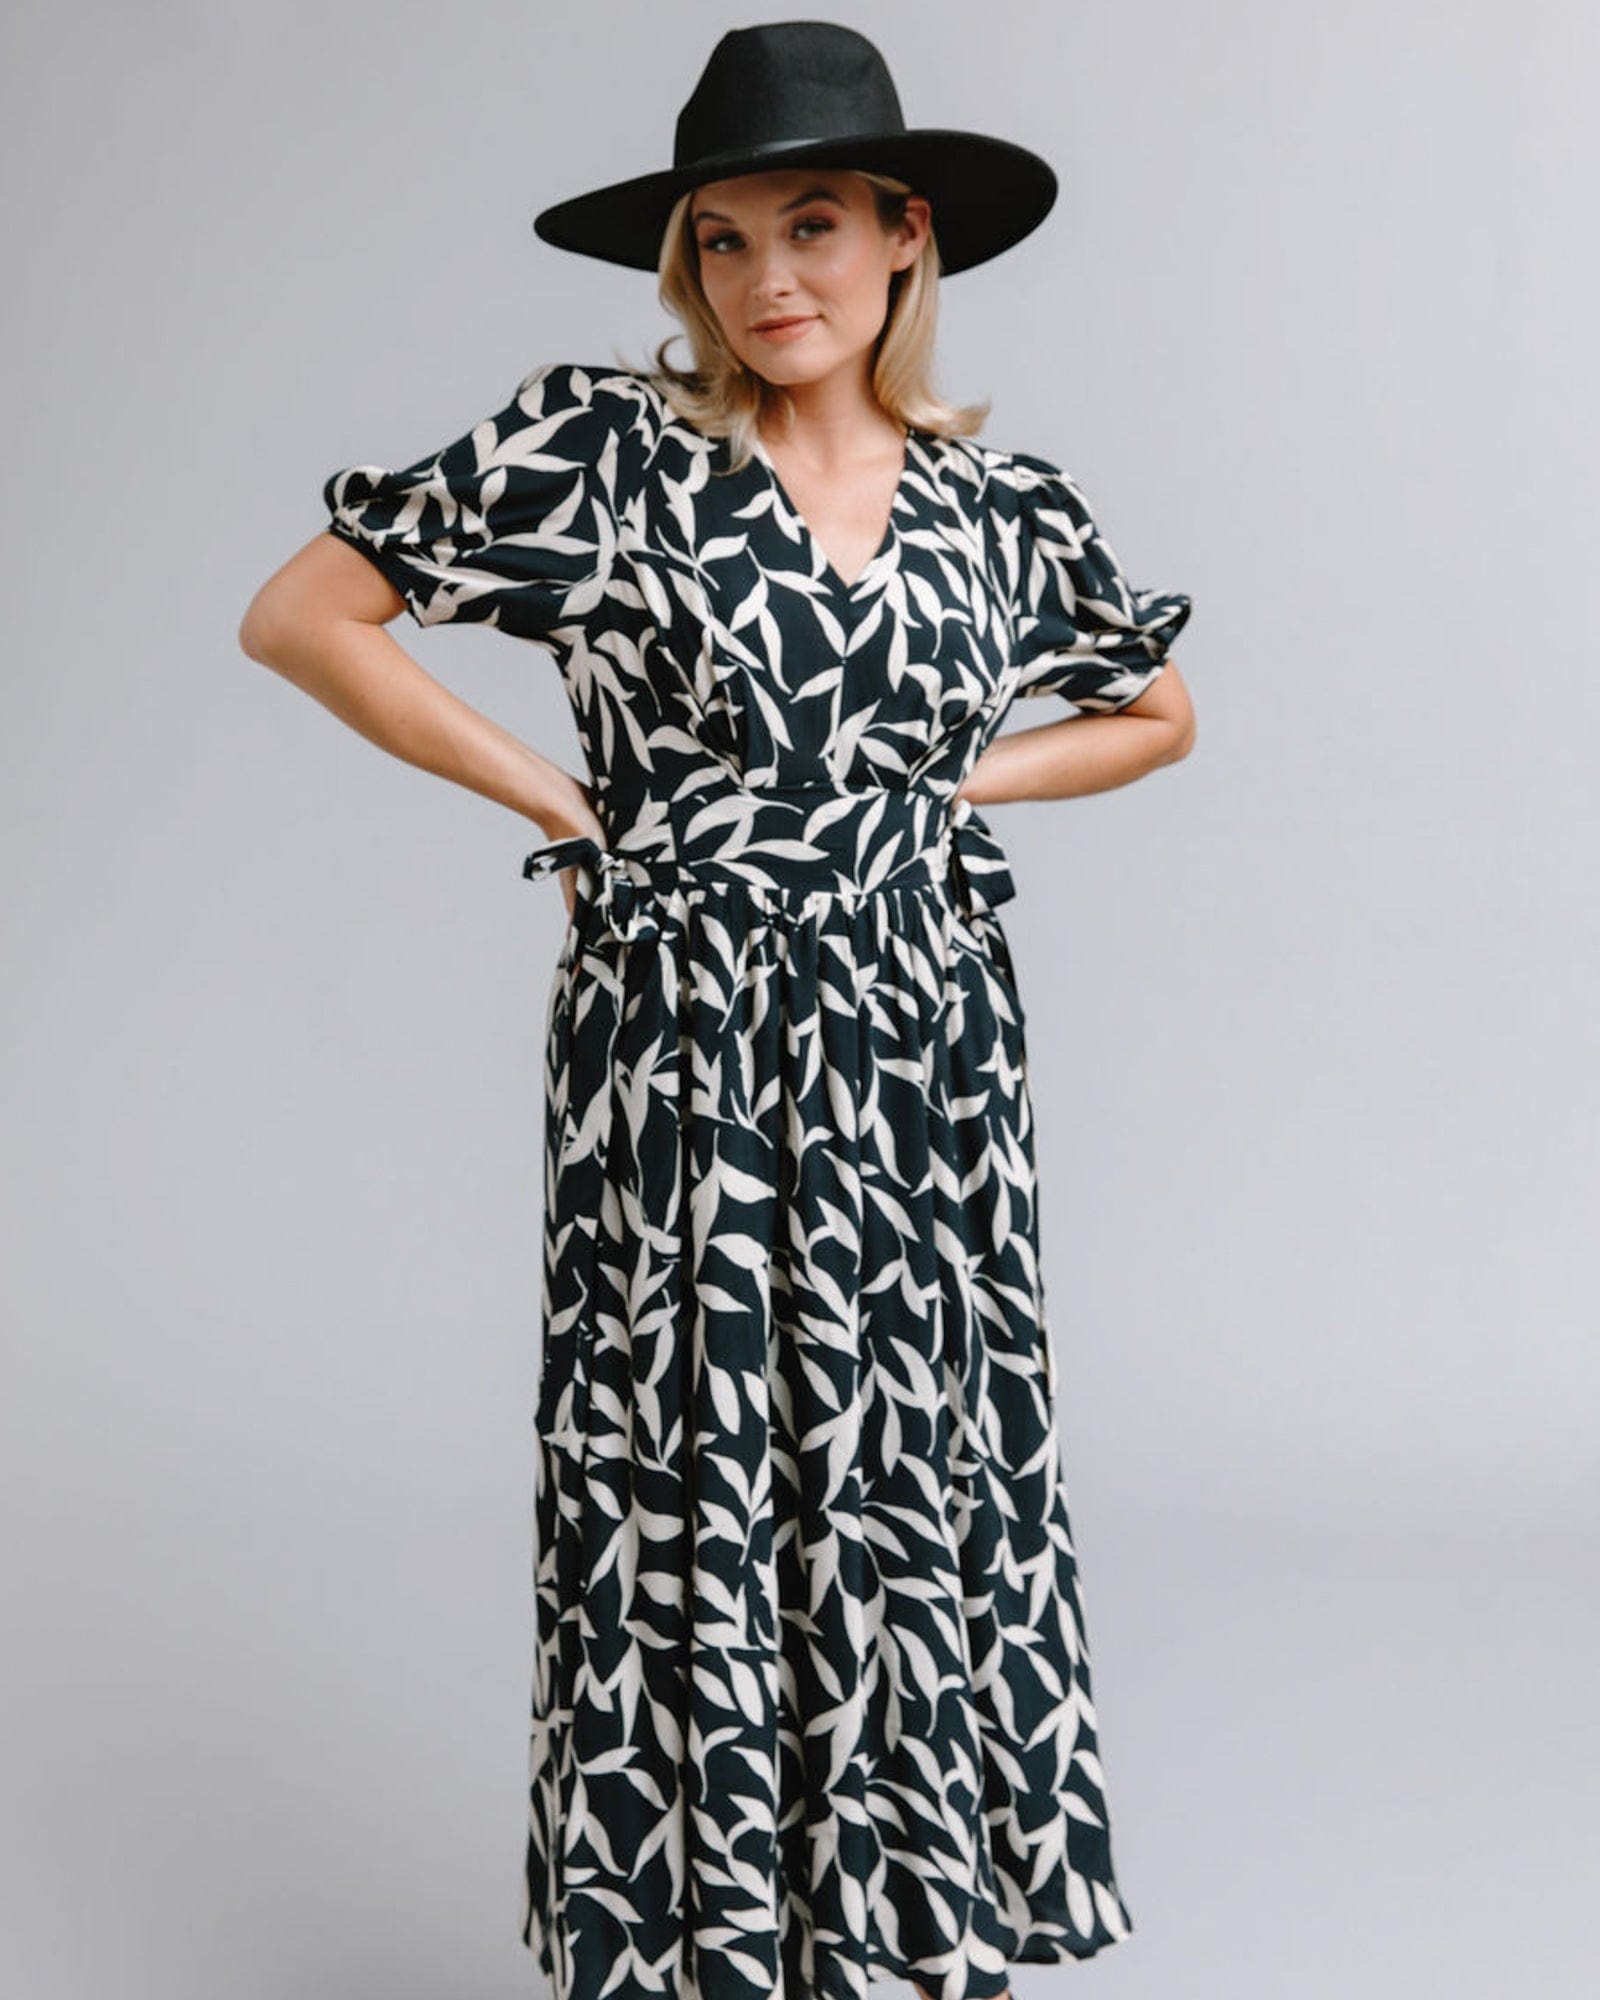 Woman in a short sleeve, midi-length, black and white print dress